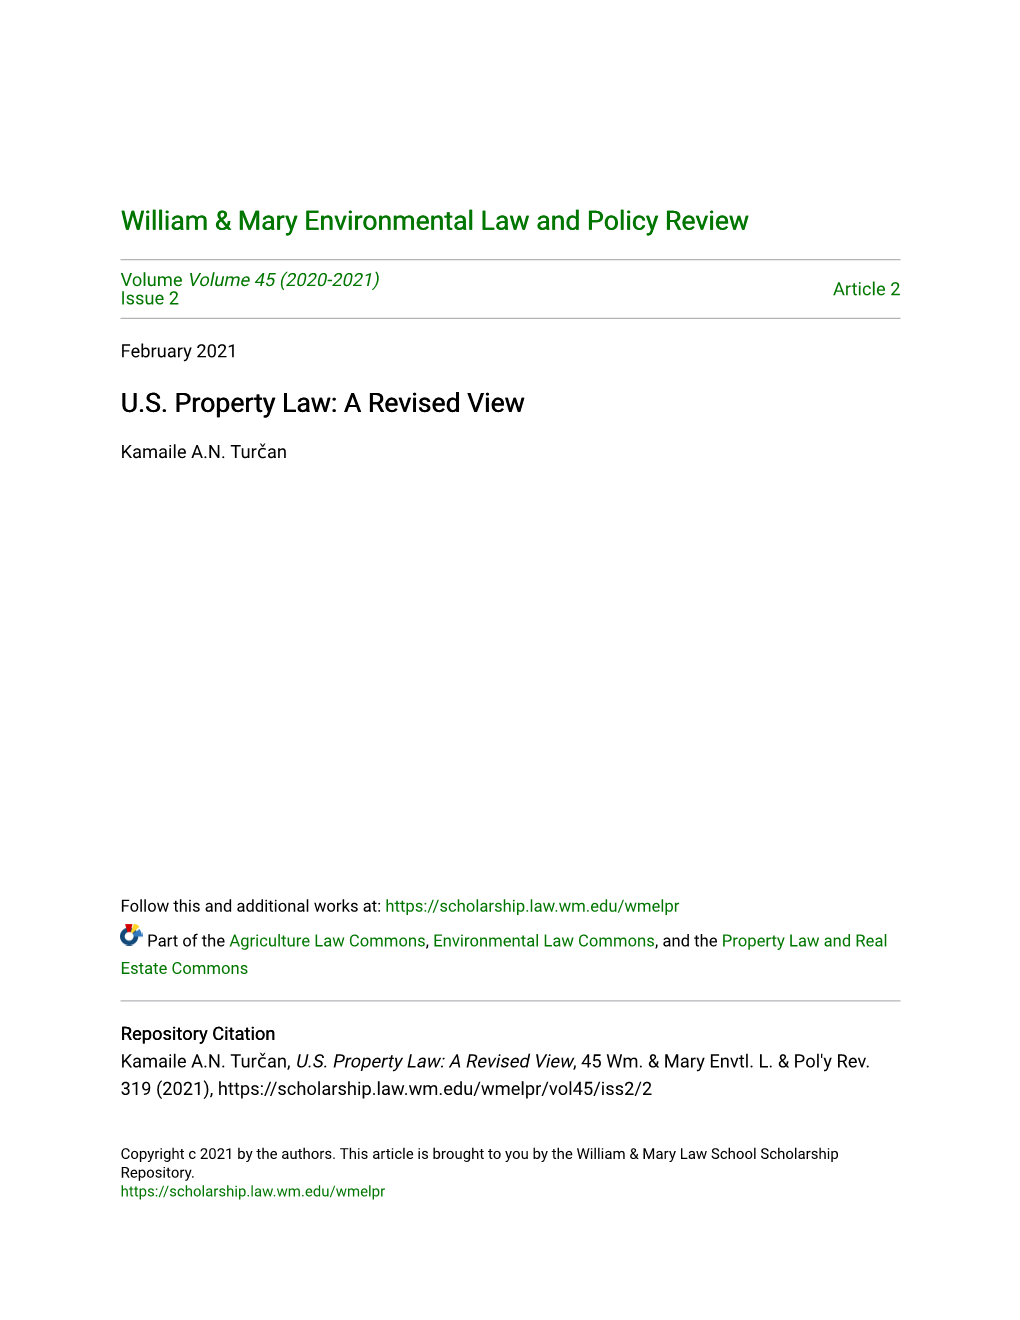 U.S. Property Law: a Revised View